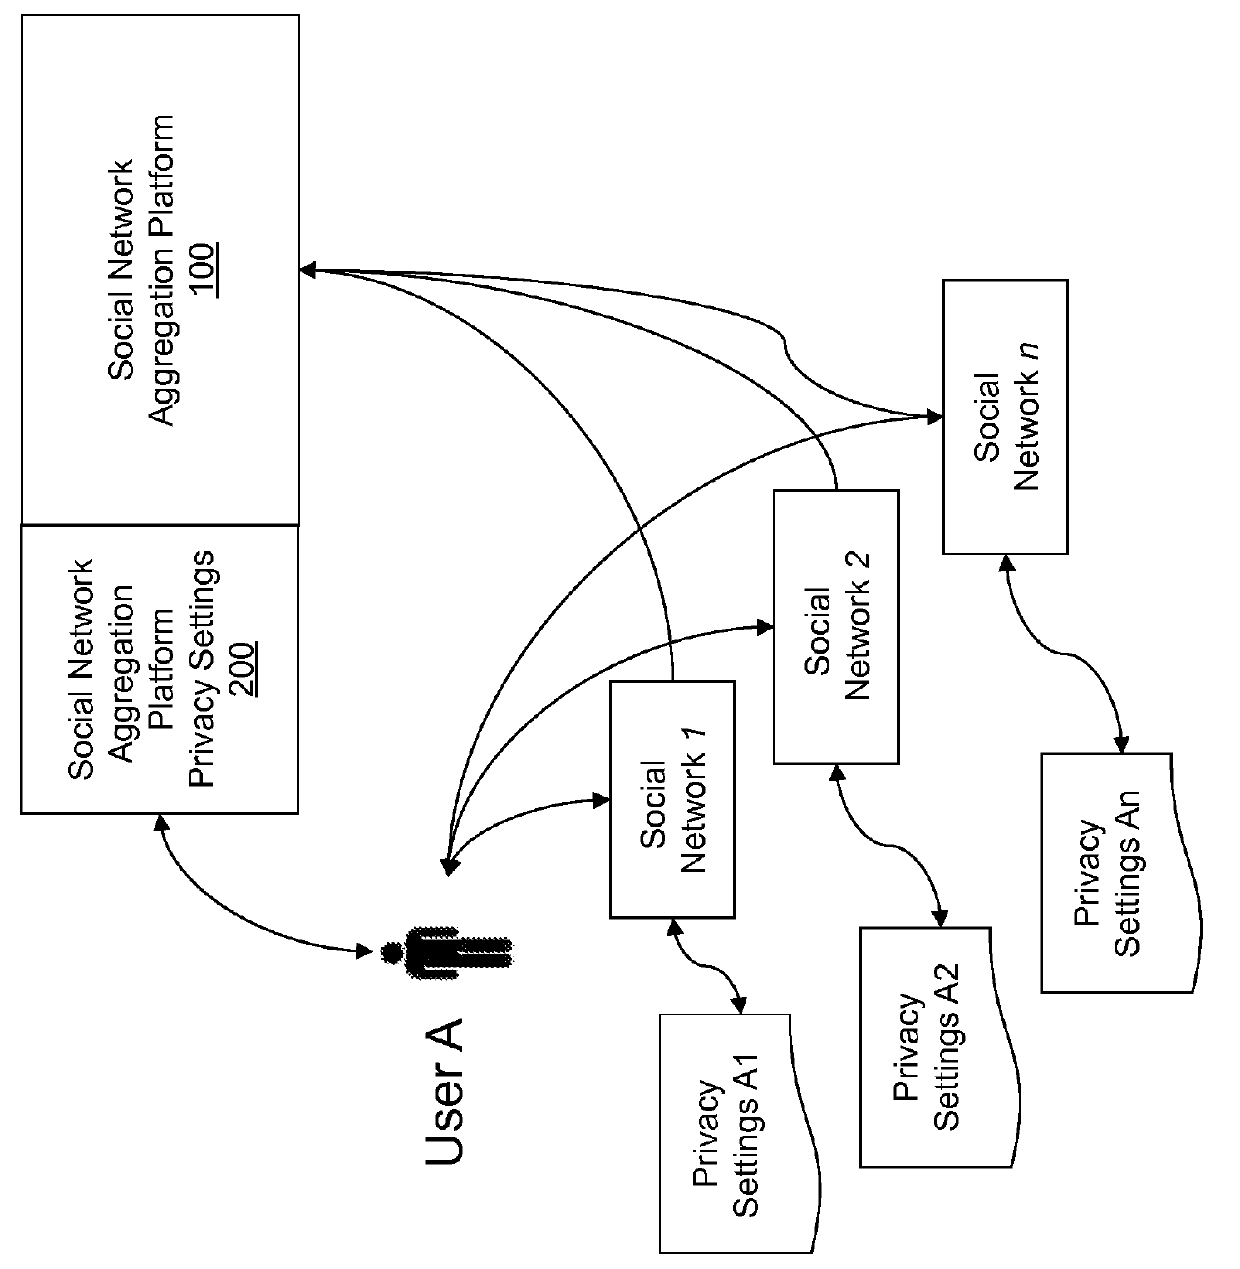 Systems and methods for implementing custom privacy settings